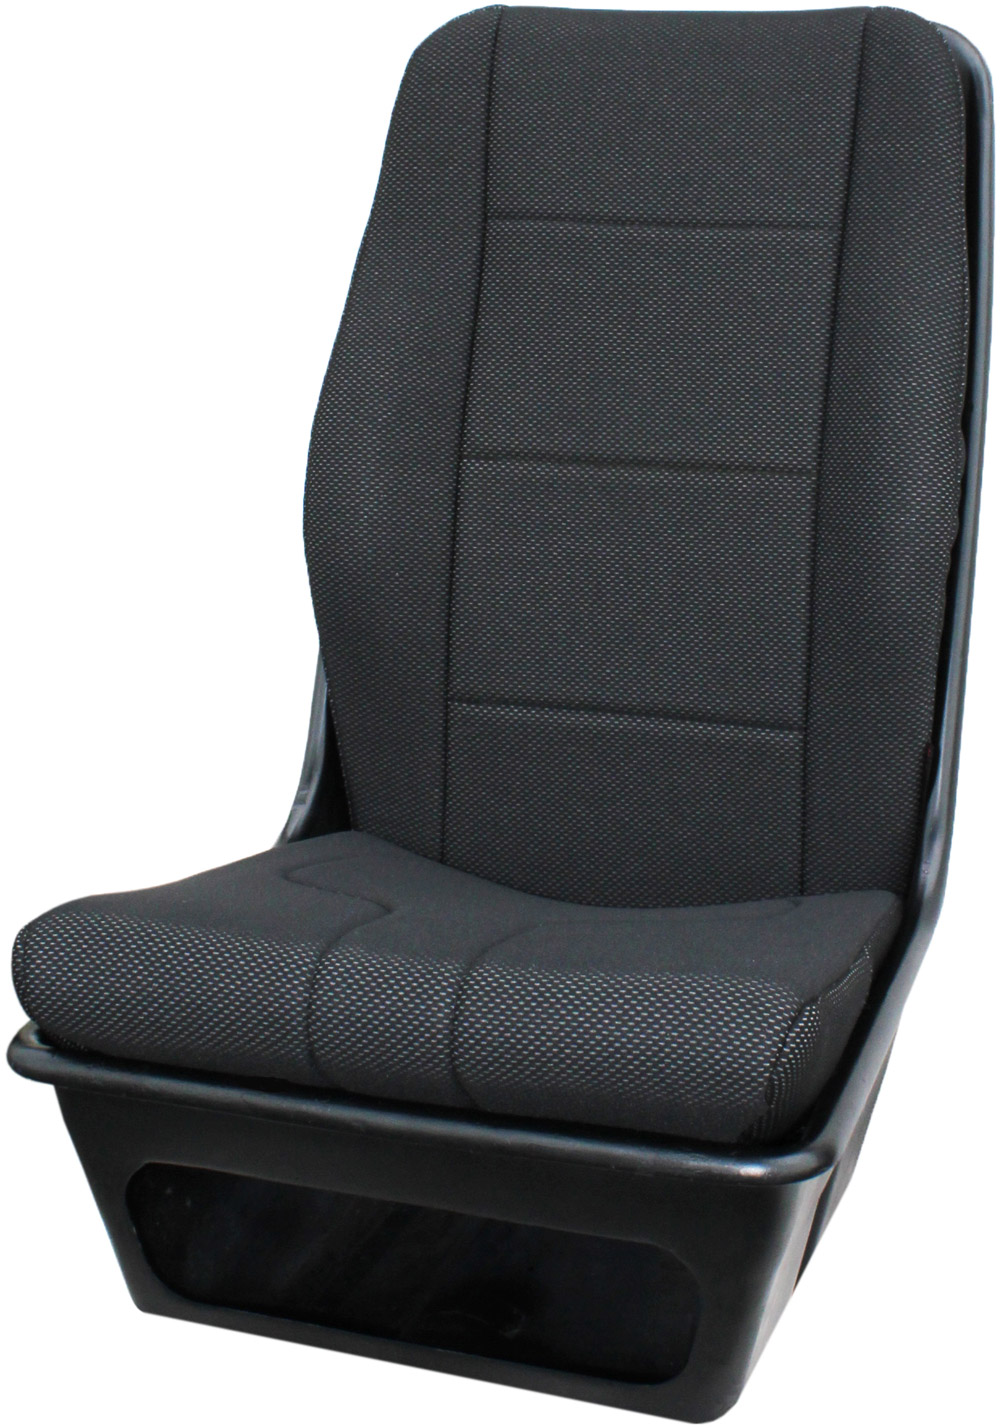 HC-350 Bucket Seat Cushions for AS350/H125 - Accessories